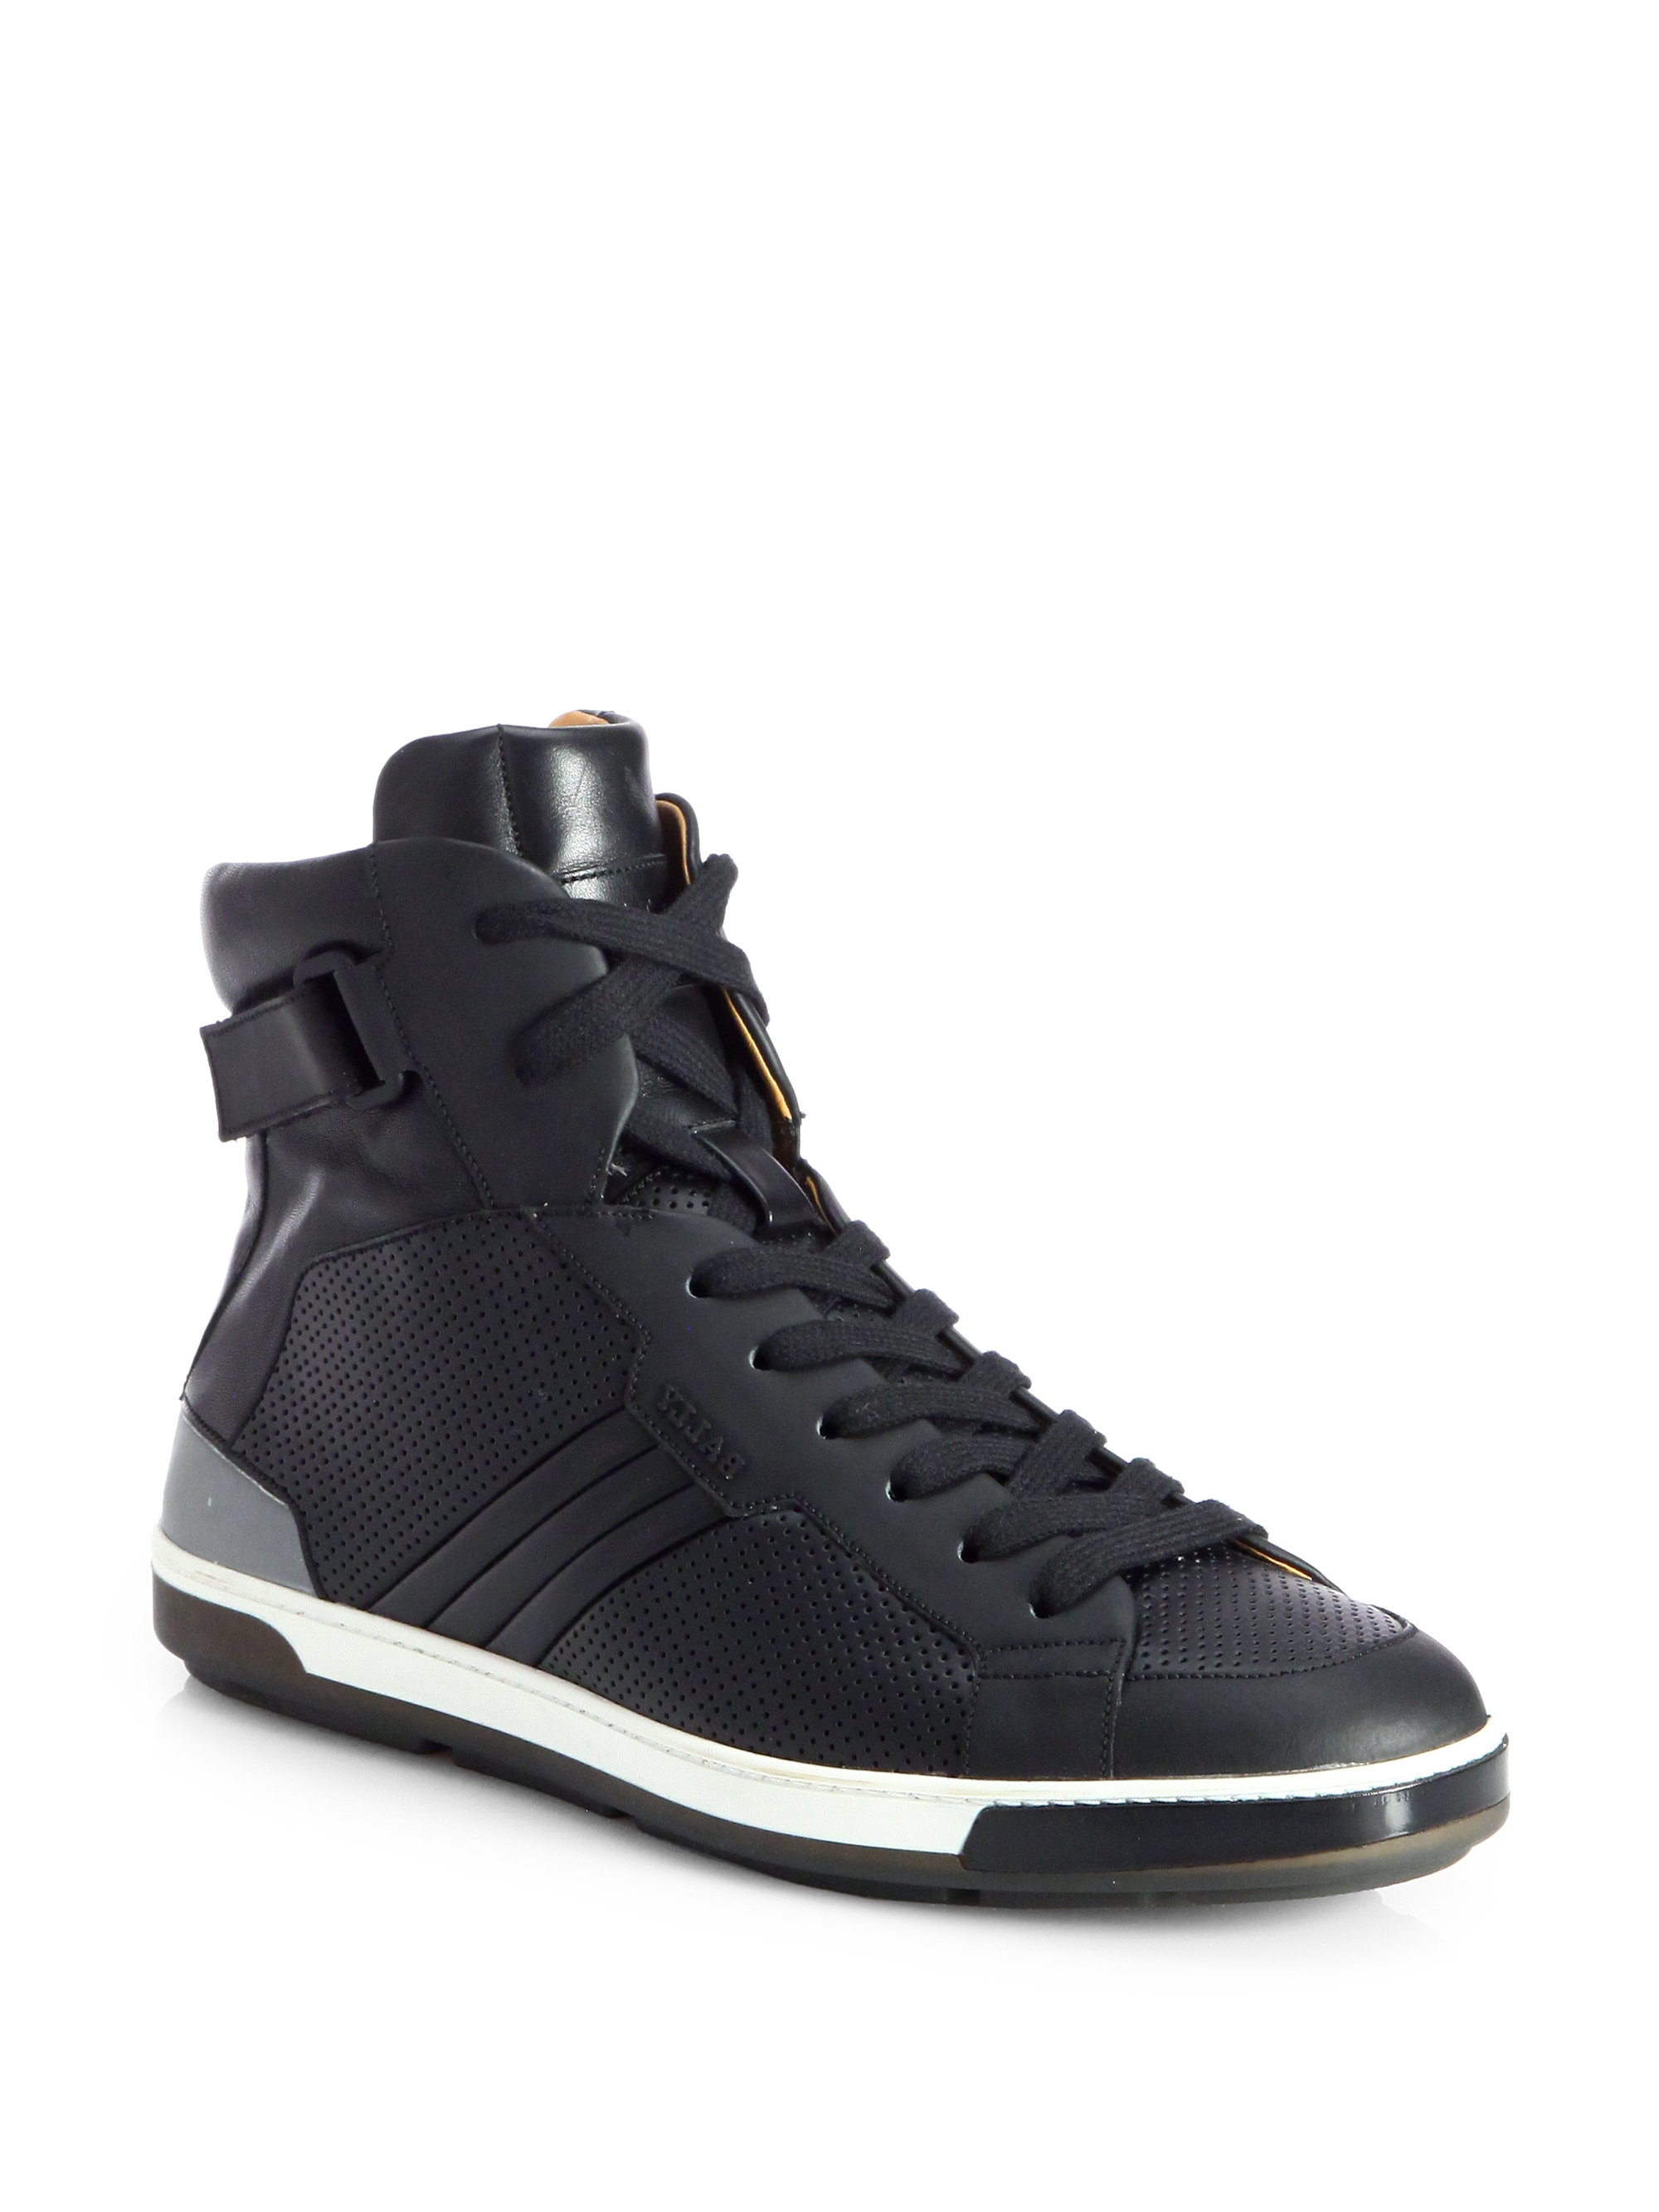 Bally Leather High-Top Sneakers in Black for Men - Lyst